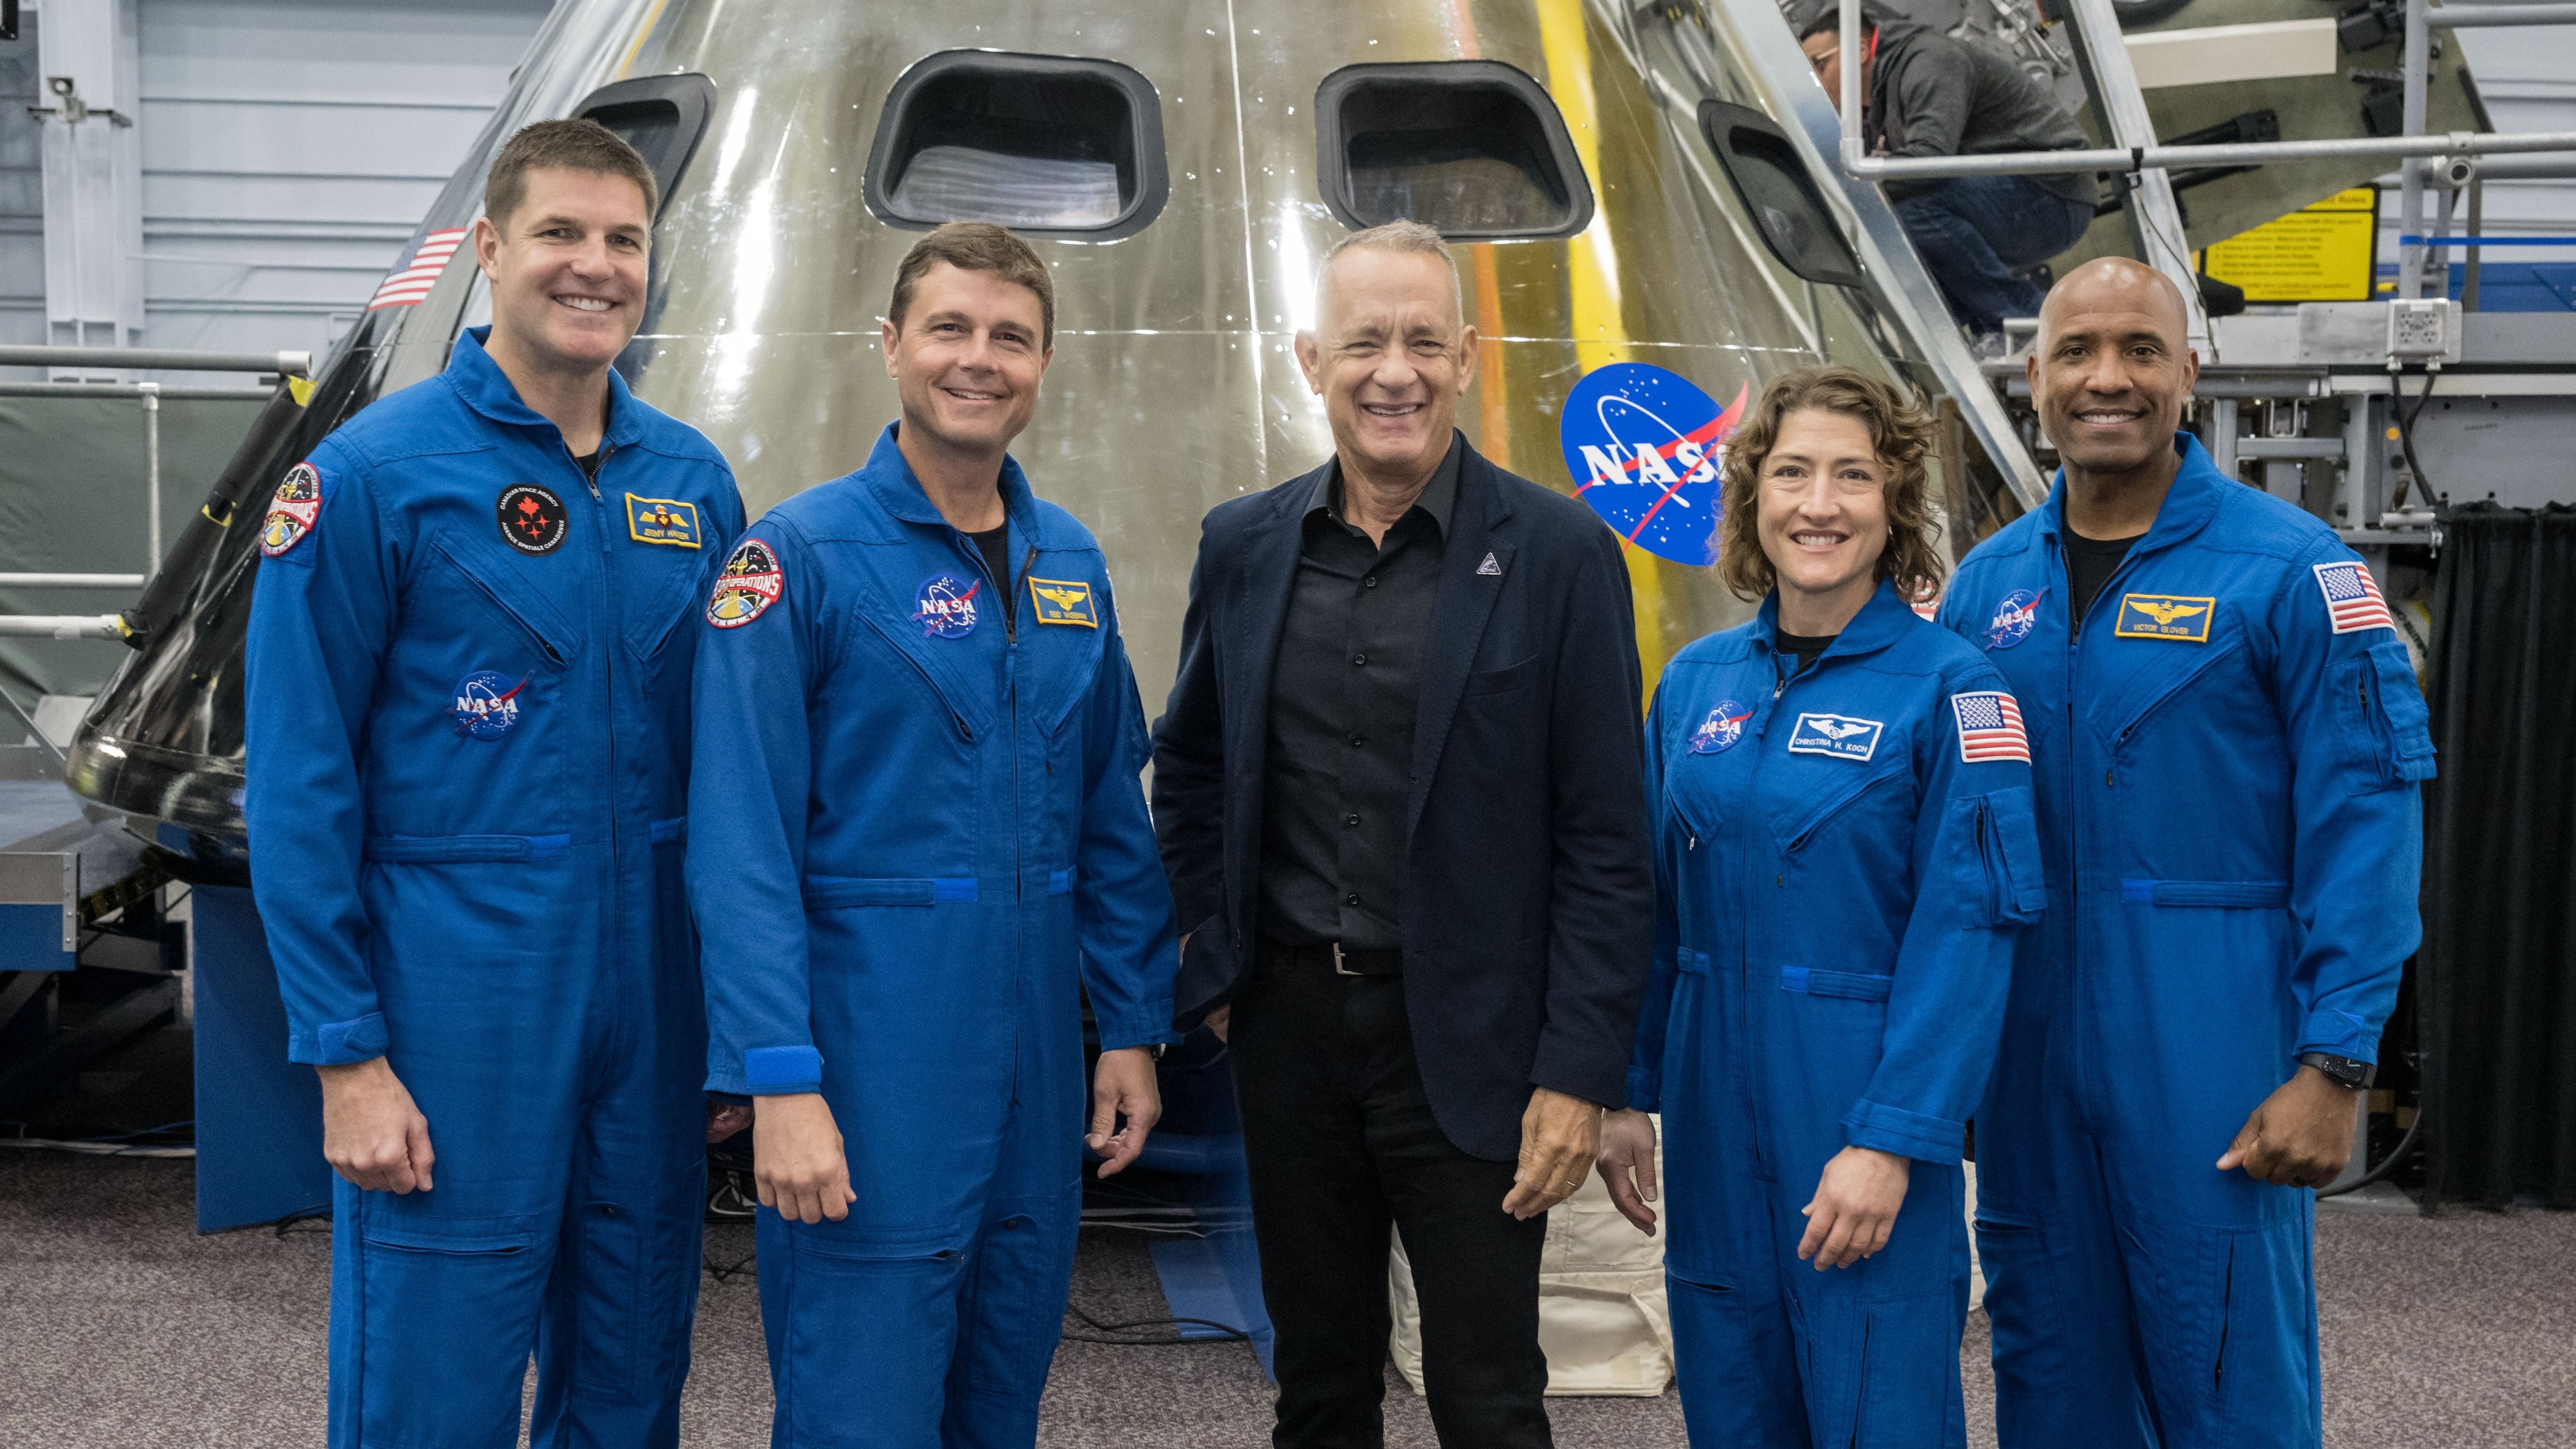 Actor and "Apollo 13" movie star Tom Hanks (center) with the Artemis 2 crew. The new moon astronauts include, from left, the Canadian Space Agency's Jeremy Hansen, NASA's Reid Wiseman, NASA's Christina Koch and NASA's Victor Glover. Behind them is a mockup of the Orion spacecraft for moon missions.